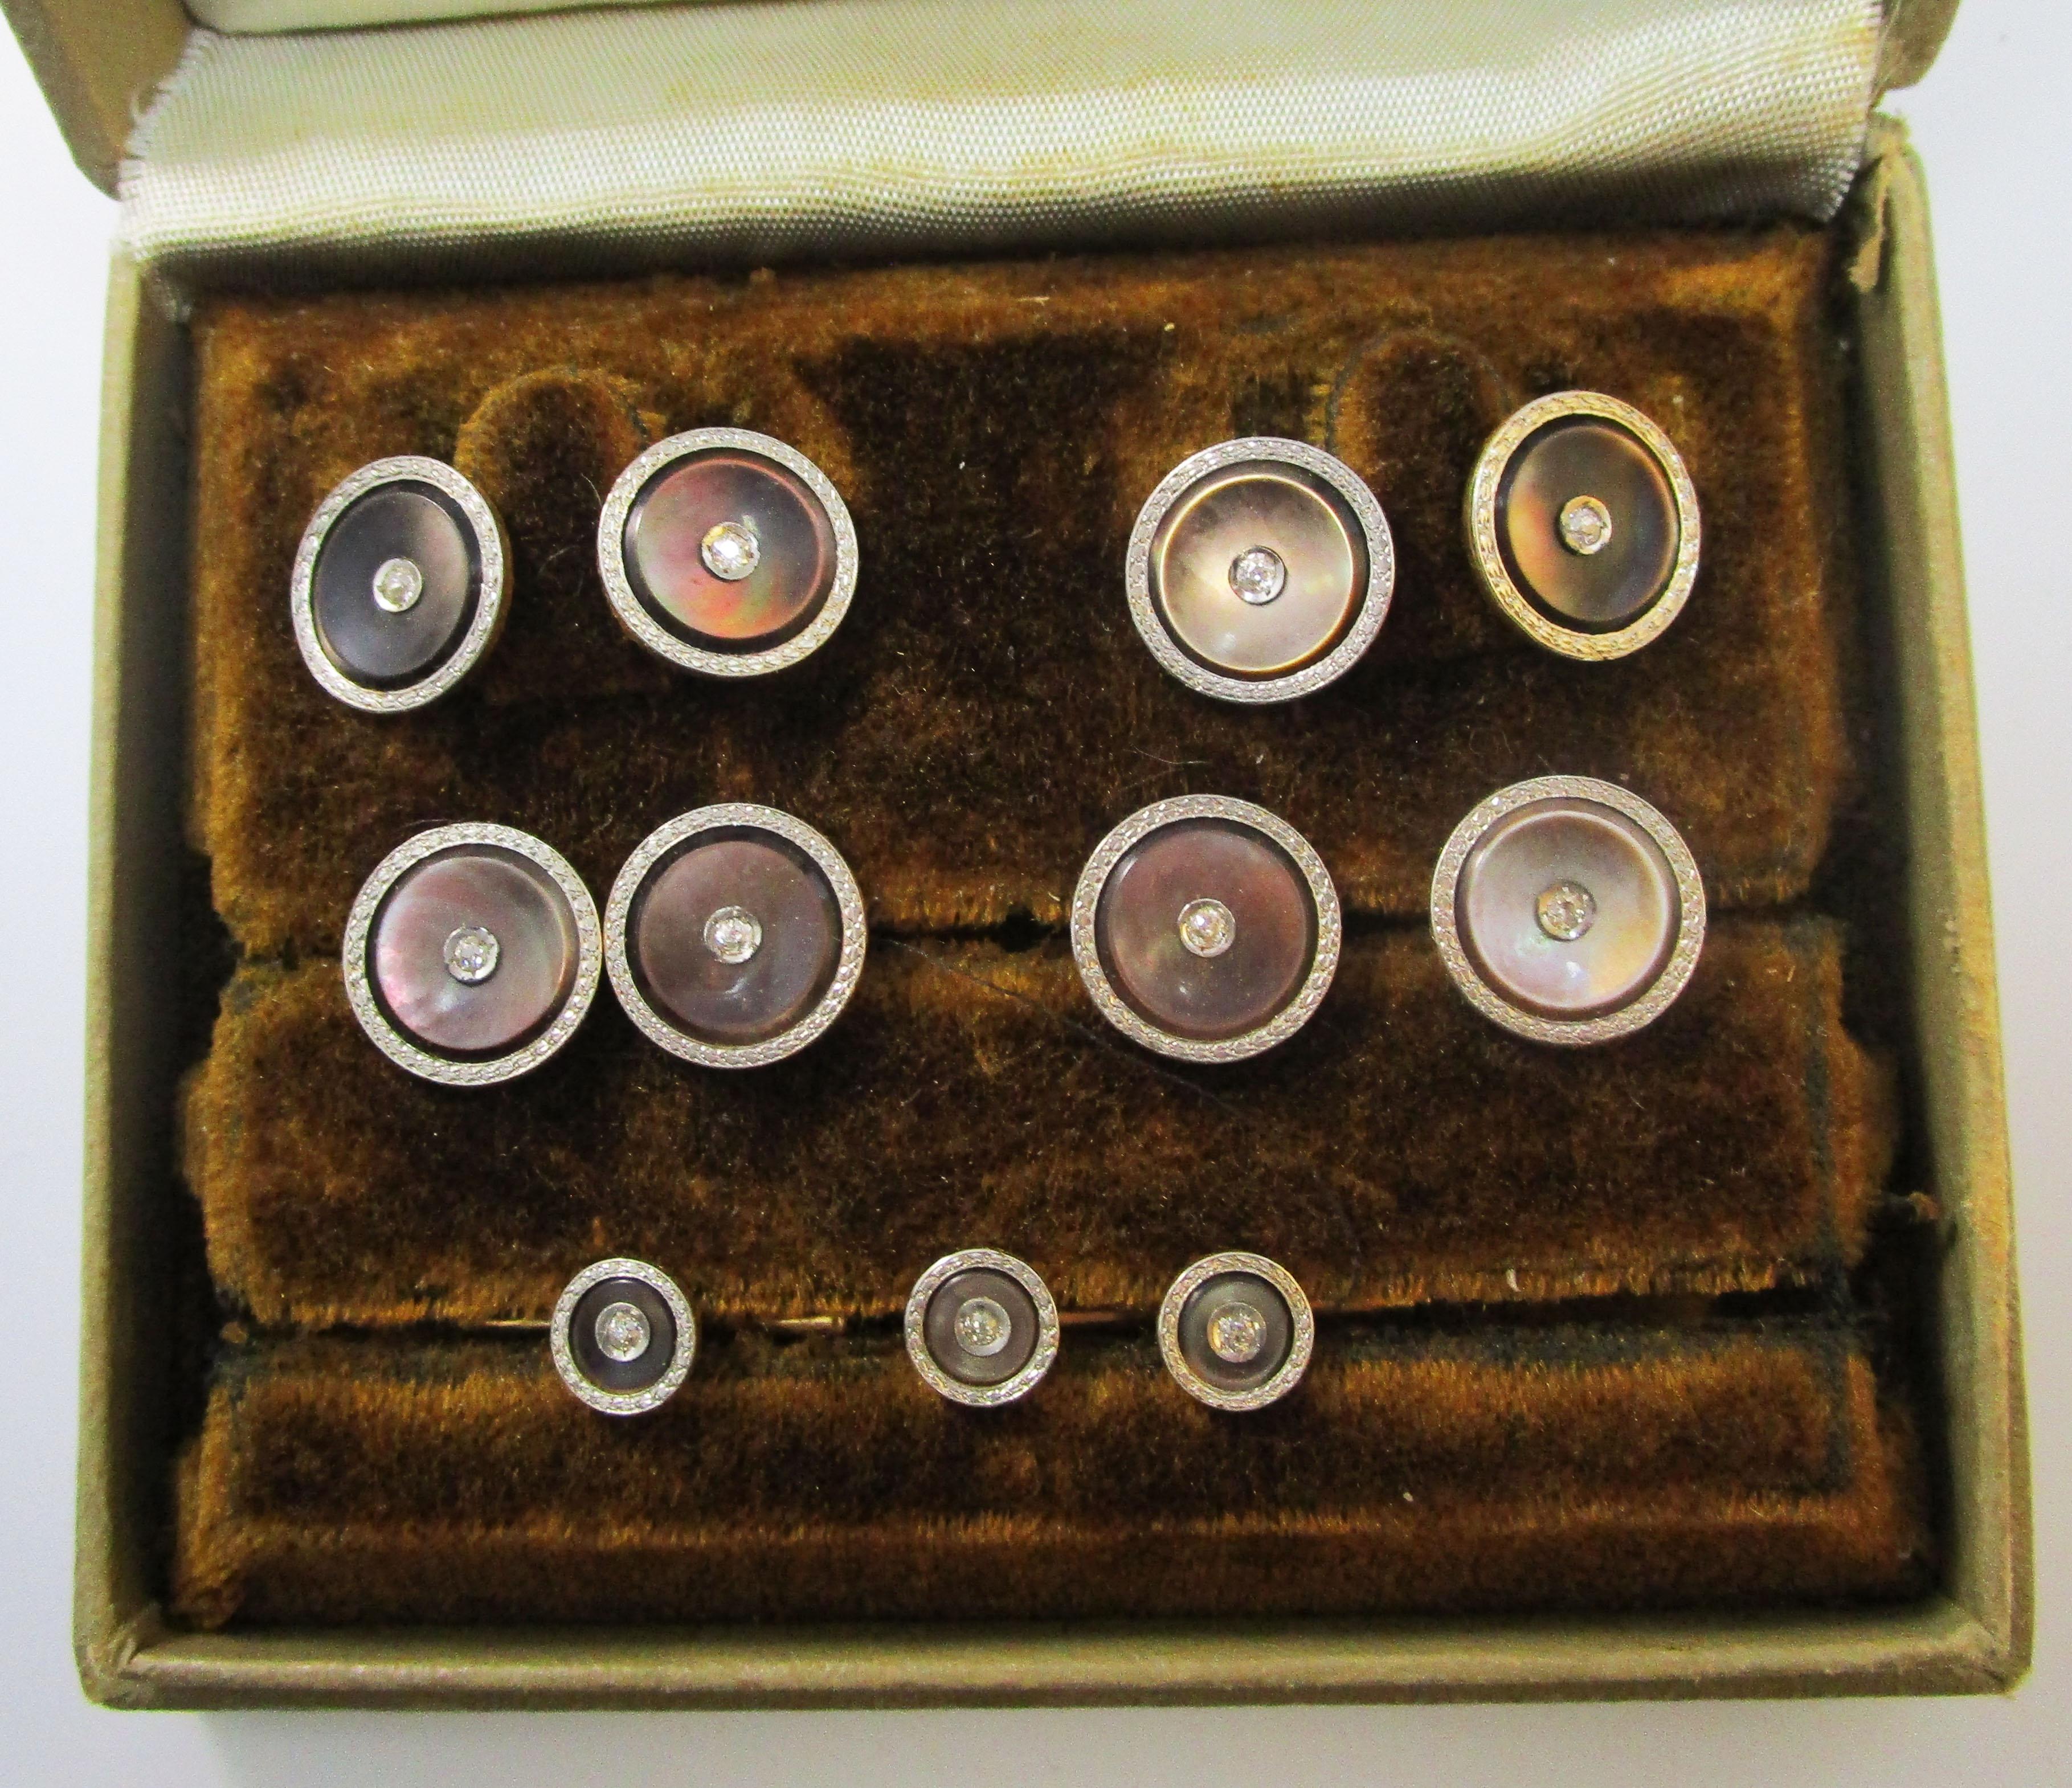 This is a remarkable platinum over gold mother of pearl stud set with diamond centers by Black, Starr & Gorham. The stud set is in fantastic condition and in its box! The combination of platinum, diamonds, and rich mother of pearl makes this set as